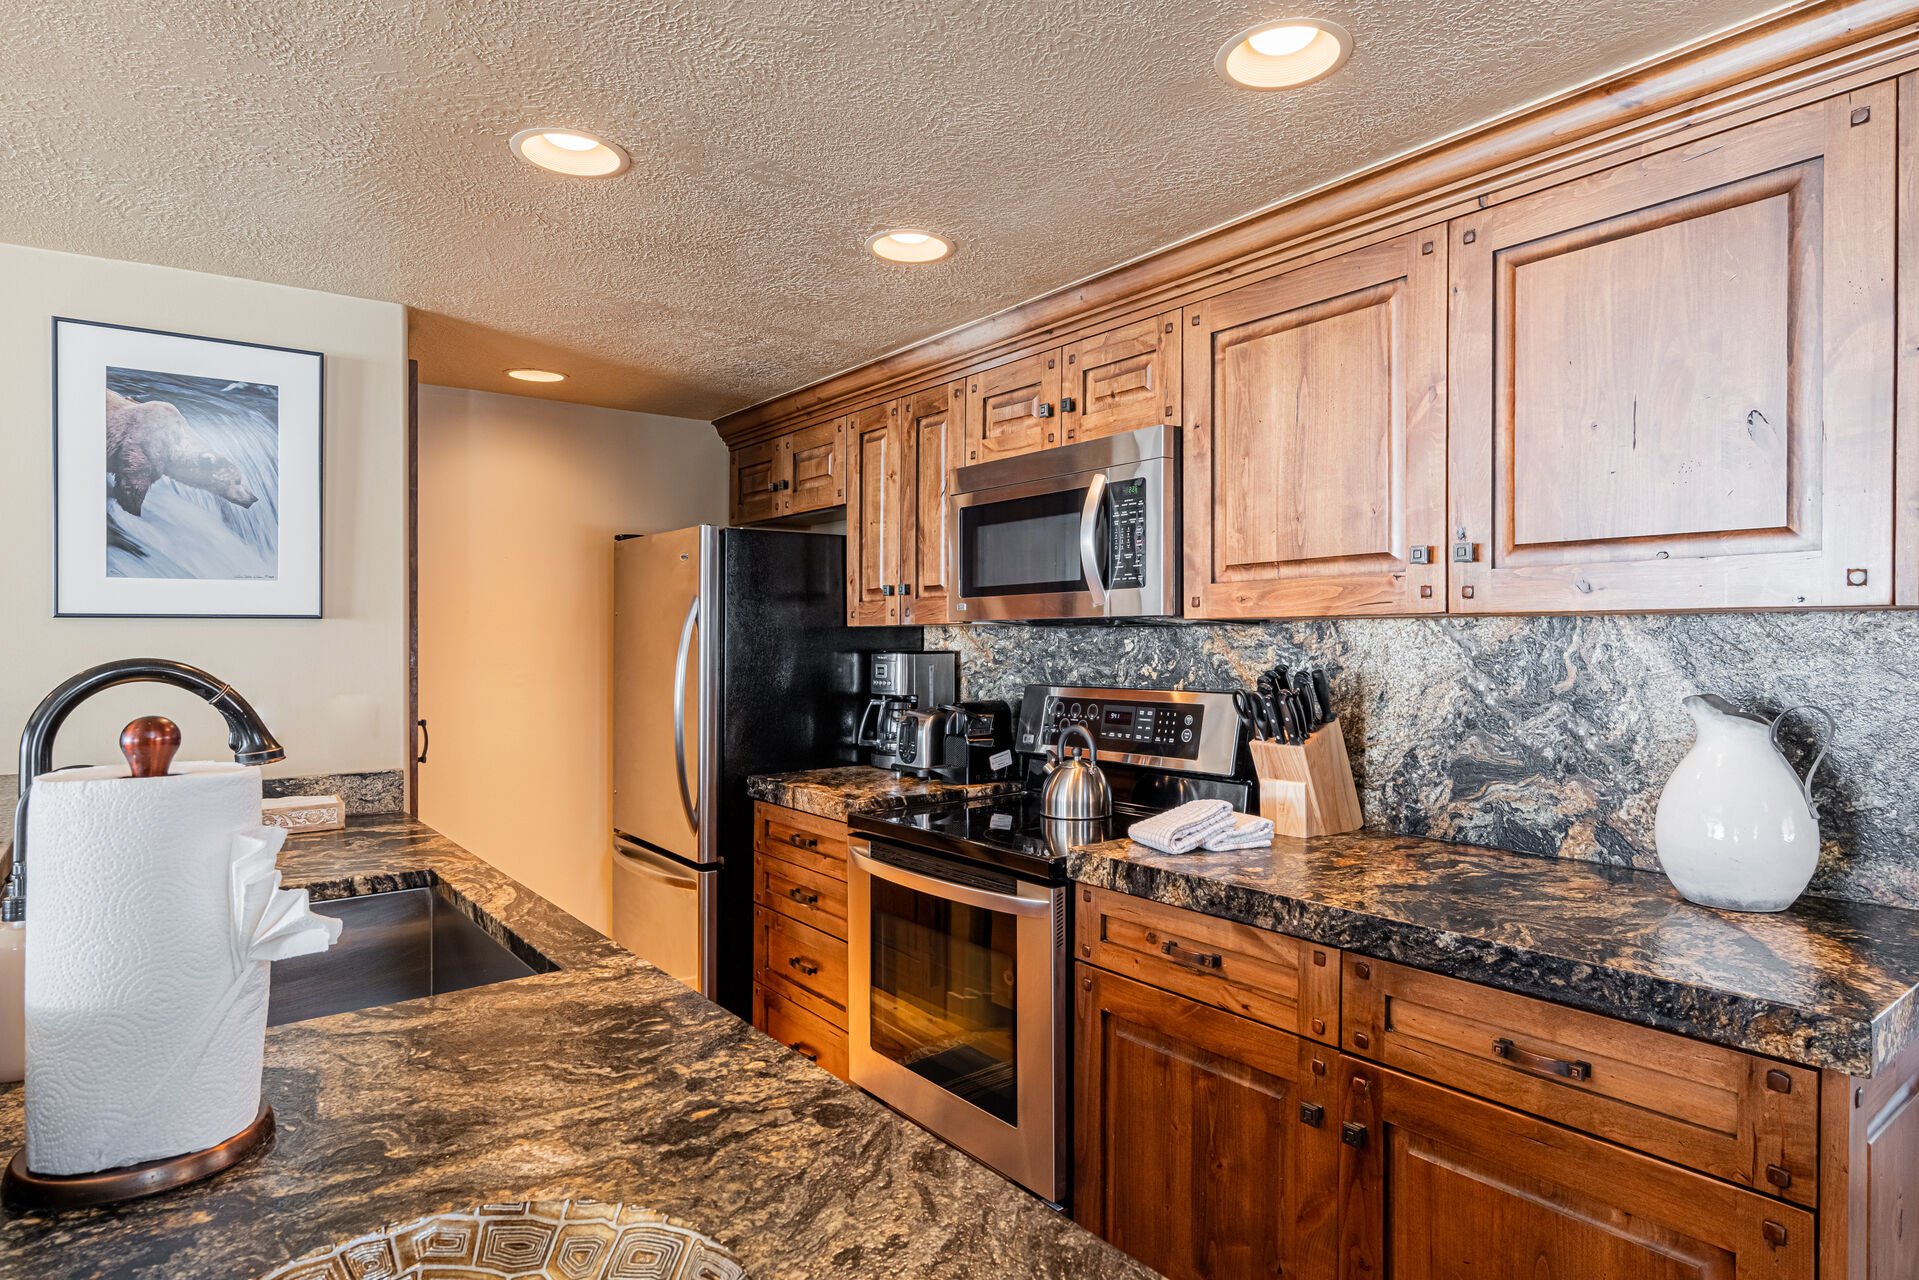 Fully Equipped Kitchen with gorgeous stone countertops, stainless steel appliances, and bar seating for 3